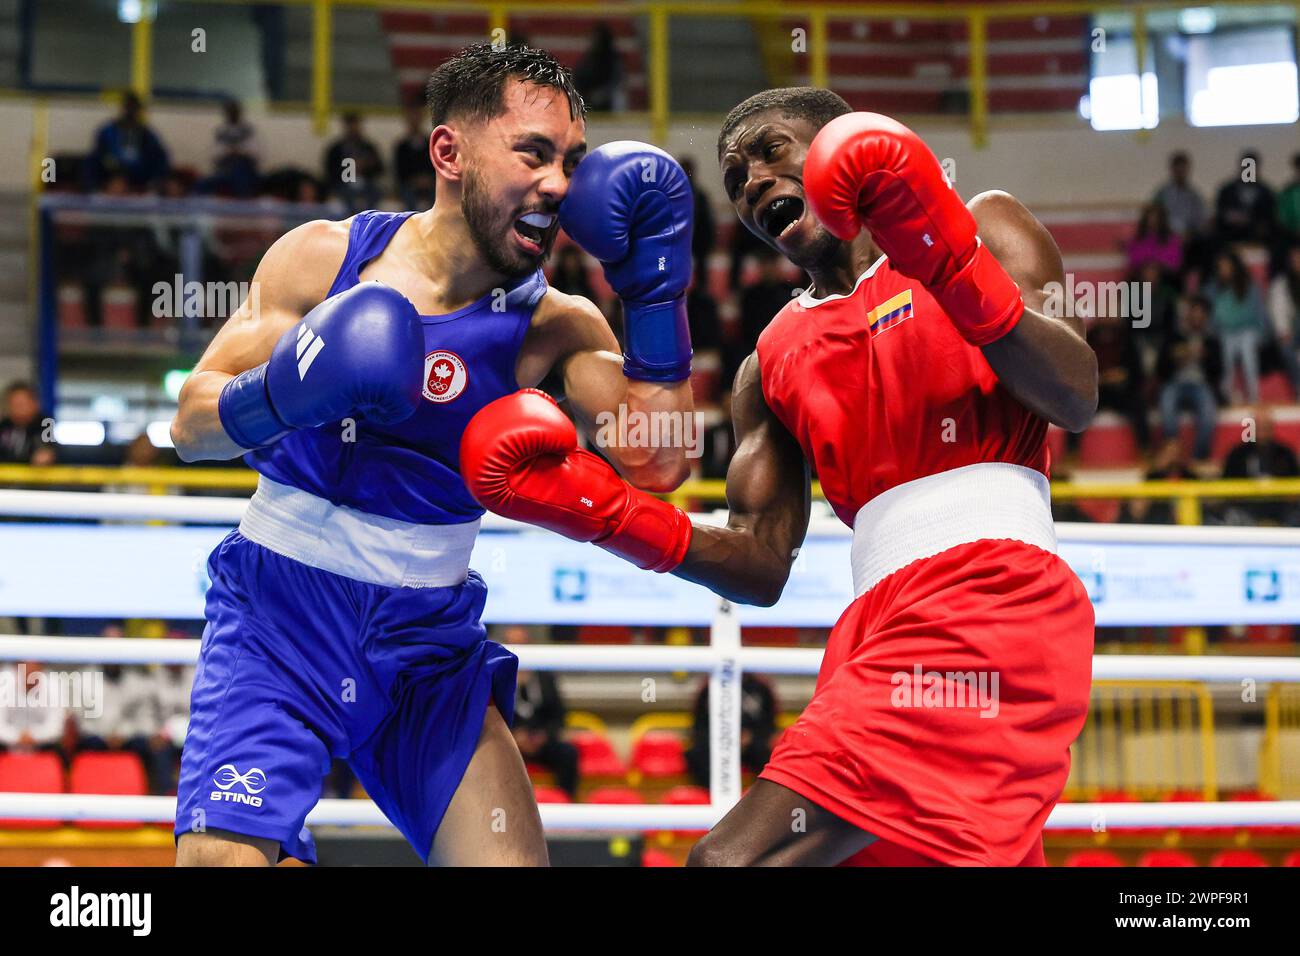 Yuberjen Martinez Rivas (Red) of Colombia in action against Justin John Sitchon Parina (Blue) of Canada during the 1st World Qualifying Tournament Boxing Road to Paris fight between Yuberjen Martinez Rivas (Red) of Colombia and Justin John Sitchon Parina (Blue) of Canada at E-Work Arena. Stock Photo